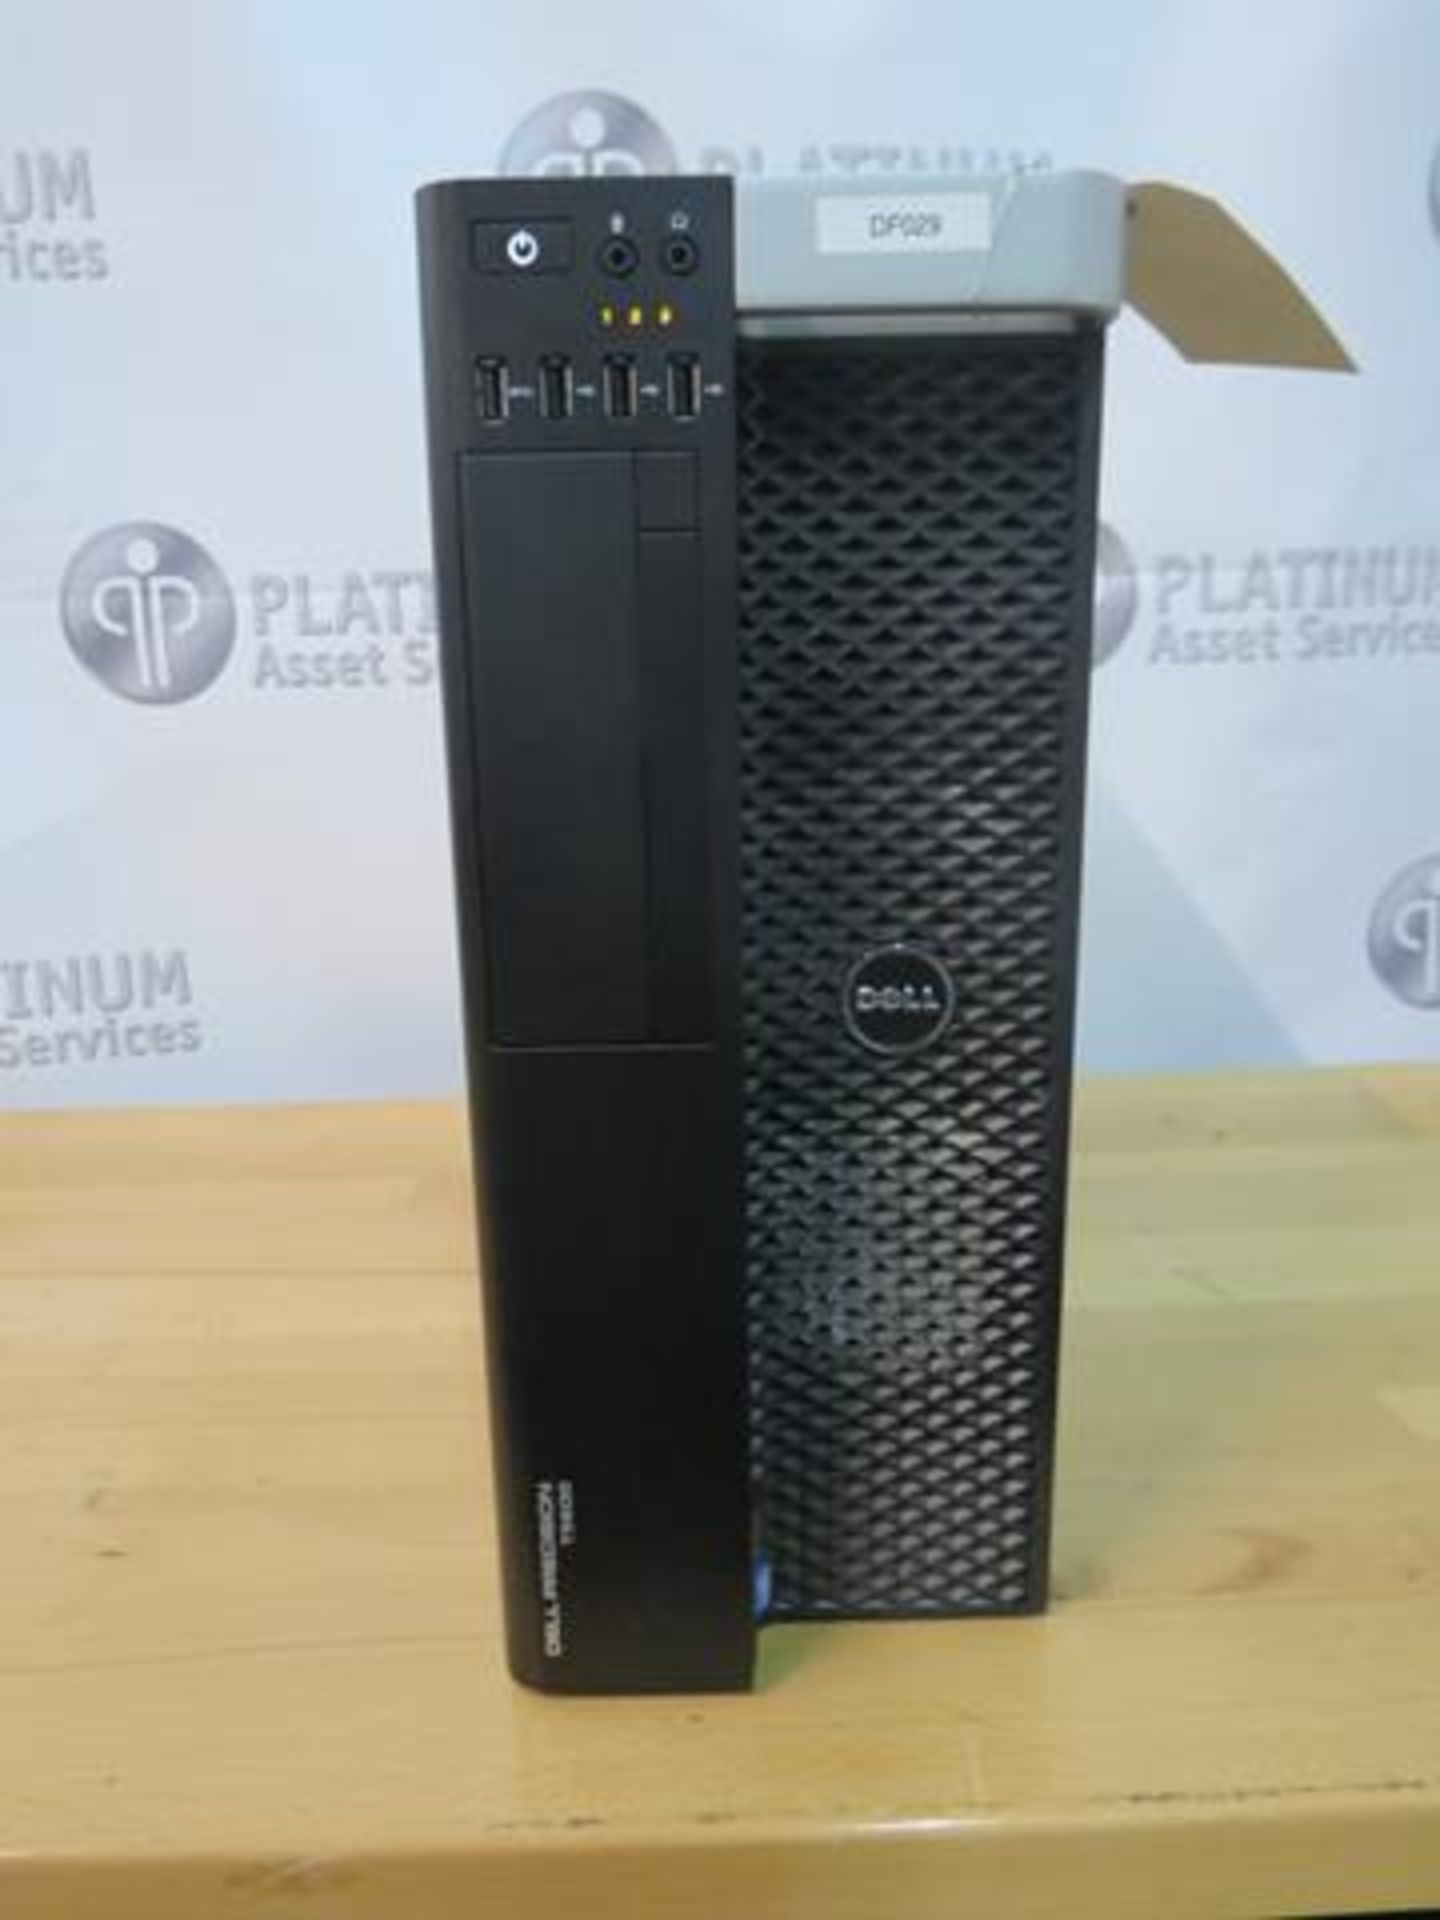 DELL, PRECISION T5600, DESKTOP WORKSTATION (UNIT DOES NOT BOOT UP) (TAG#105)